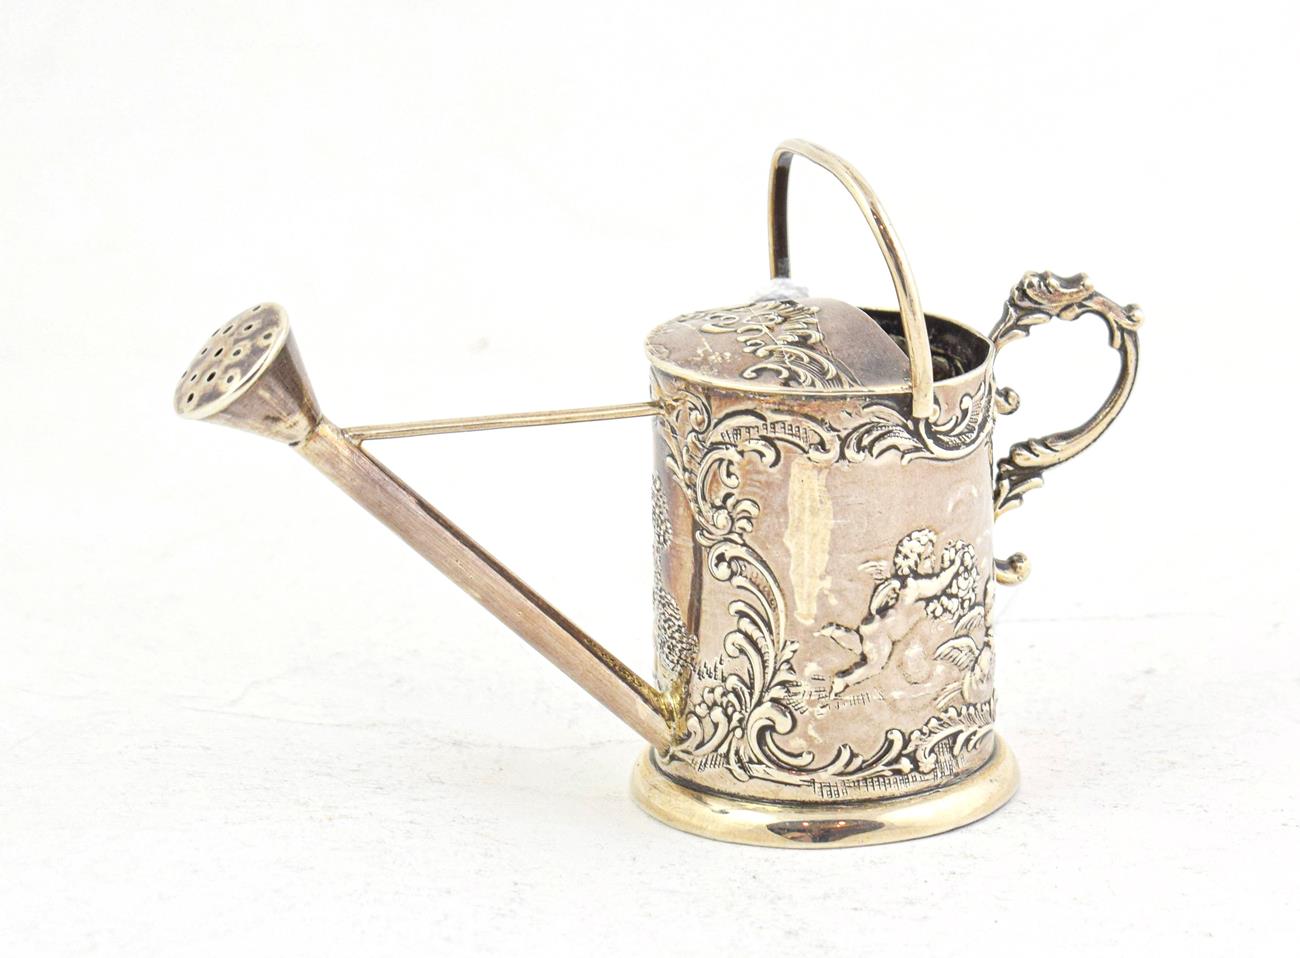 Lot 77 - A German Silver Toy Watering-Can, by Gebruder Dingeldein, Hanau, with English Import Marks for...